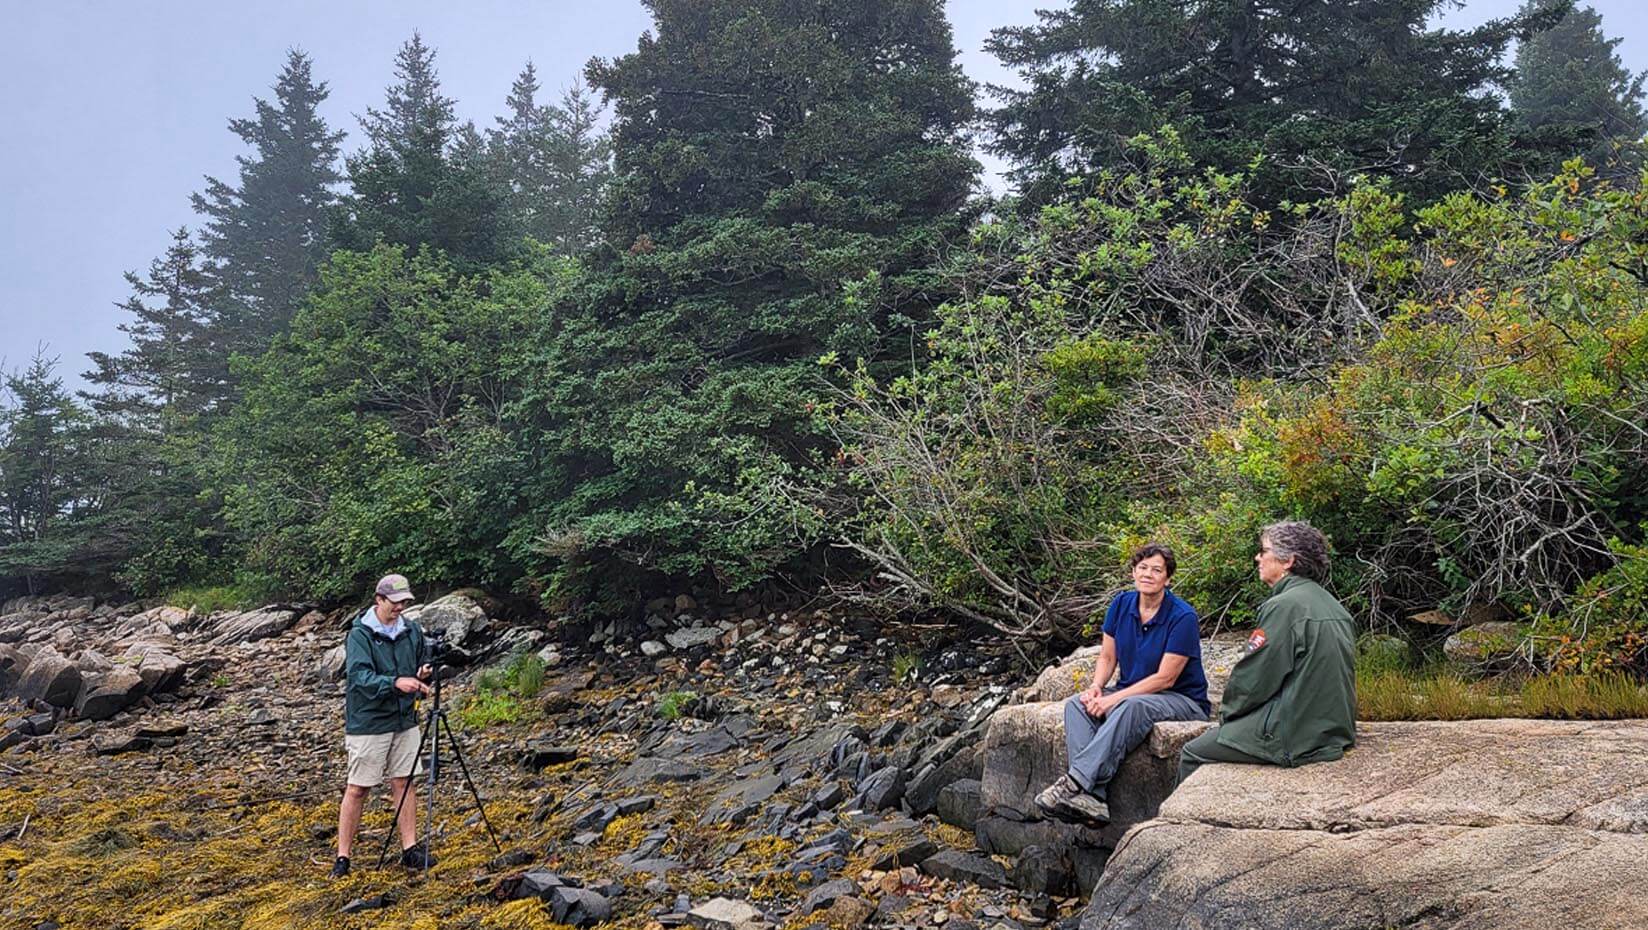 A photo of two people being recorded on video while sitting on a rock on the Maine coast